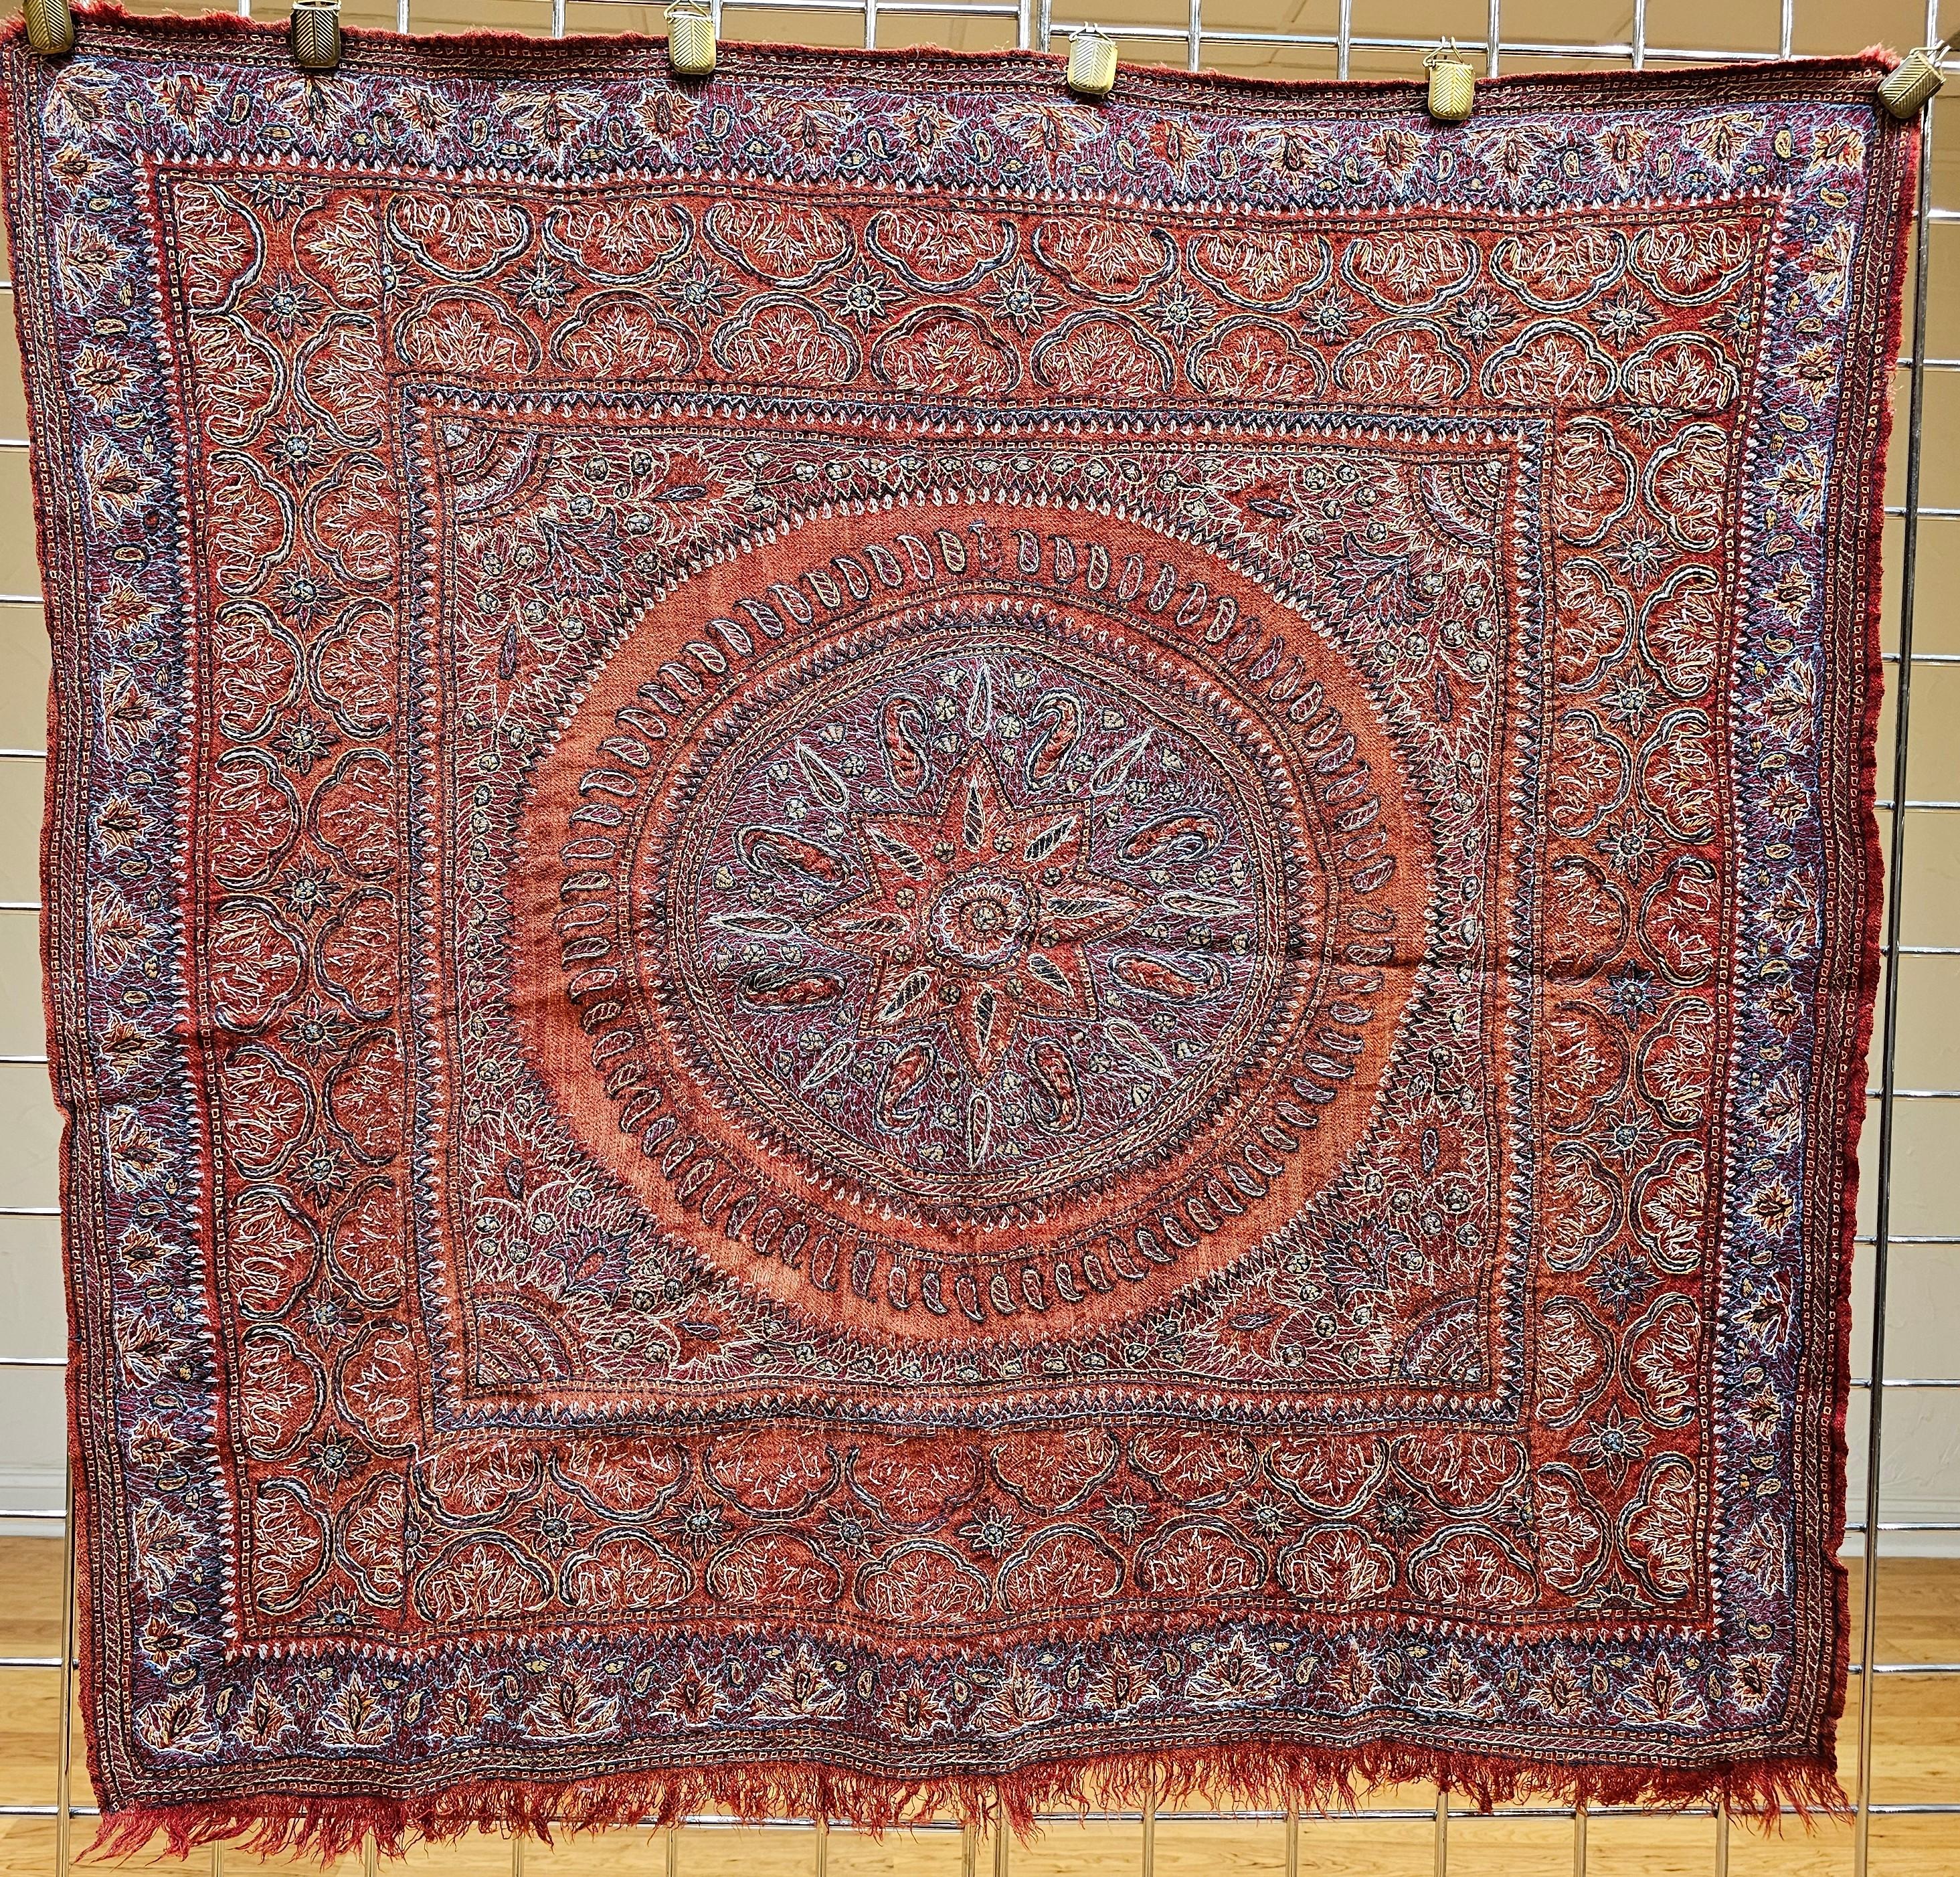 The distinctive Persian Kerman Suzani (Termeh embroidery in Persian) comes from the ancient city of Kerman in Persia. The hand embroidered textile tapestry is on a red cloth background with embroidery designs in blue, purple, yellow, and brown. The